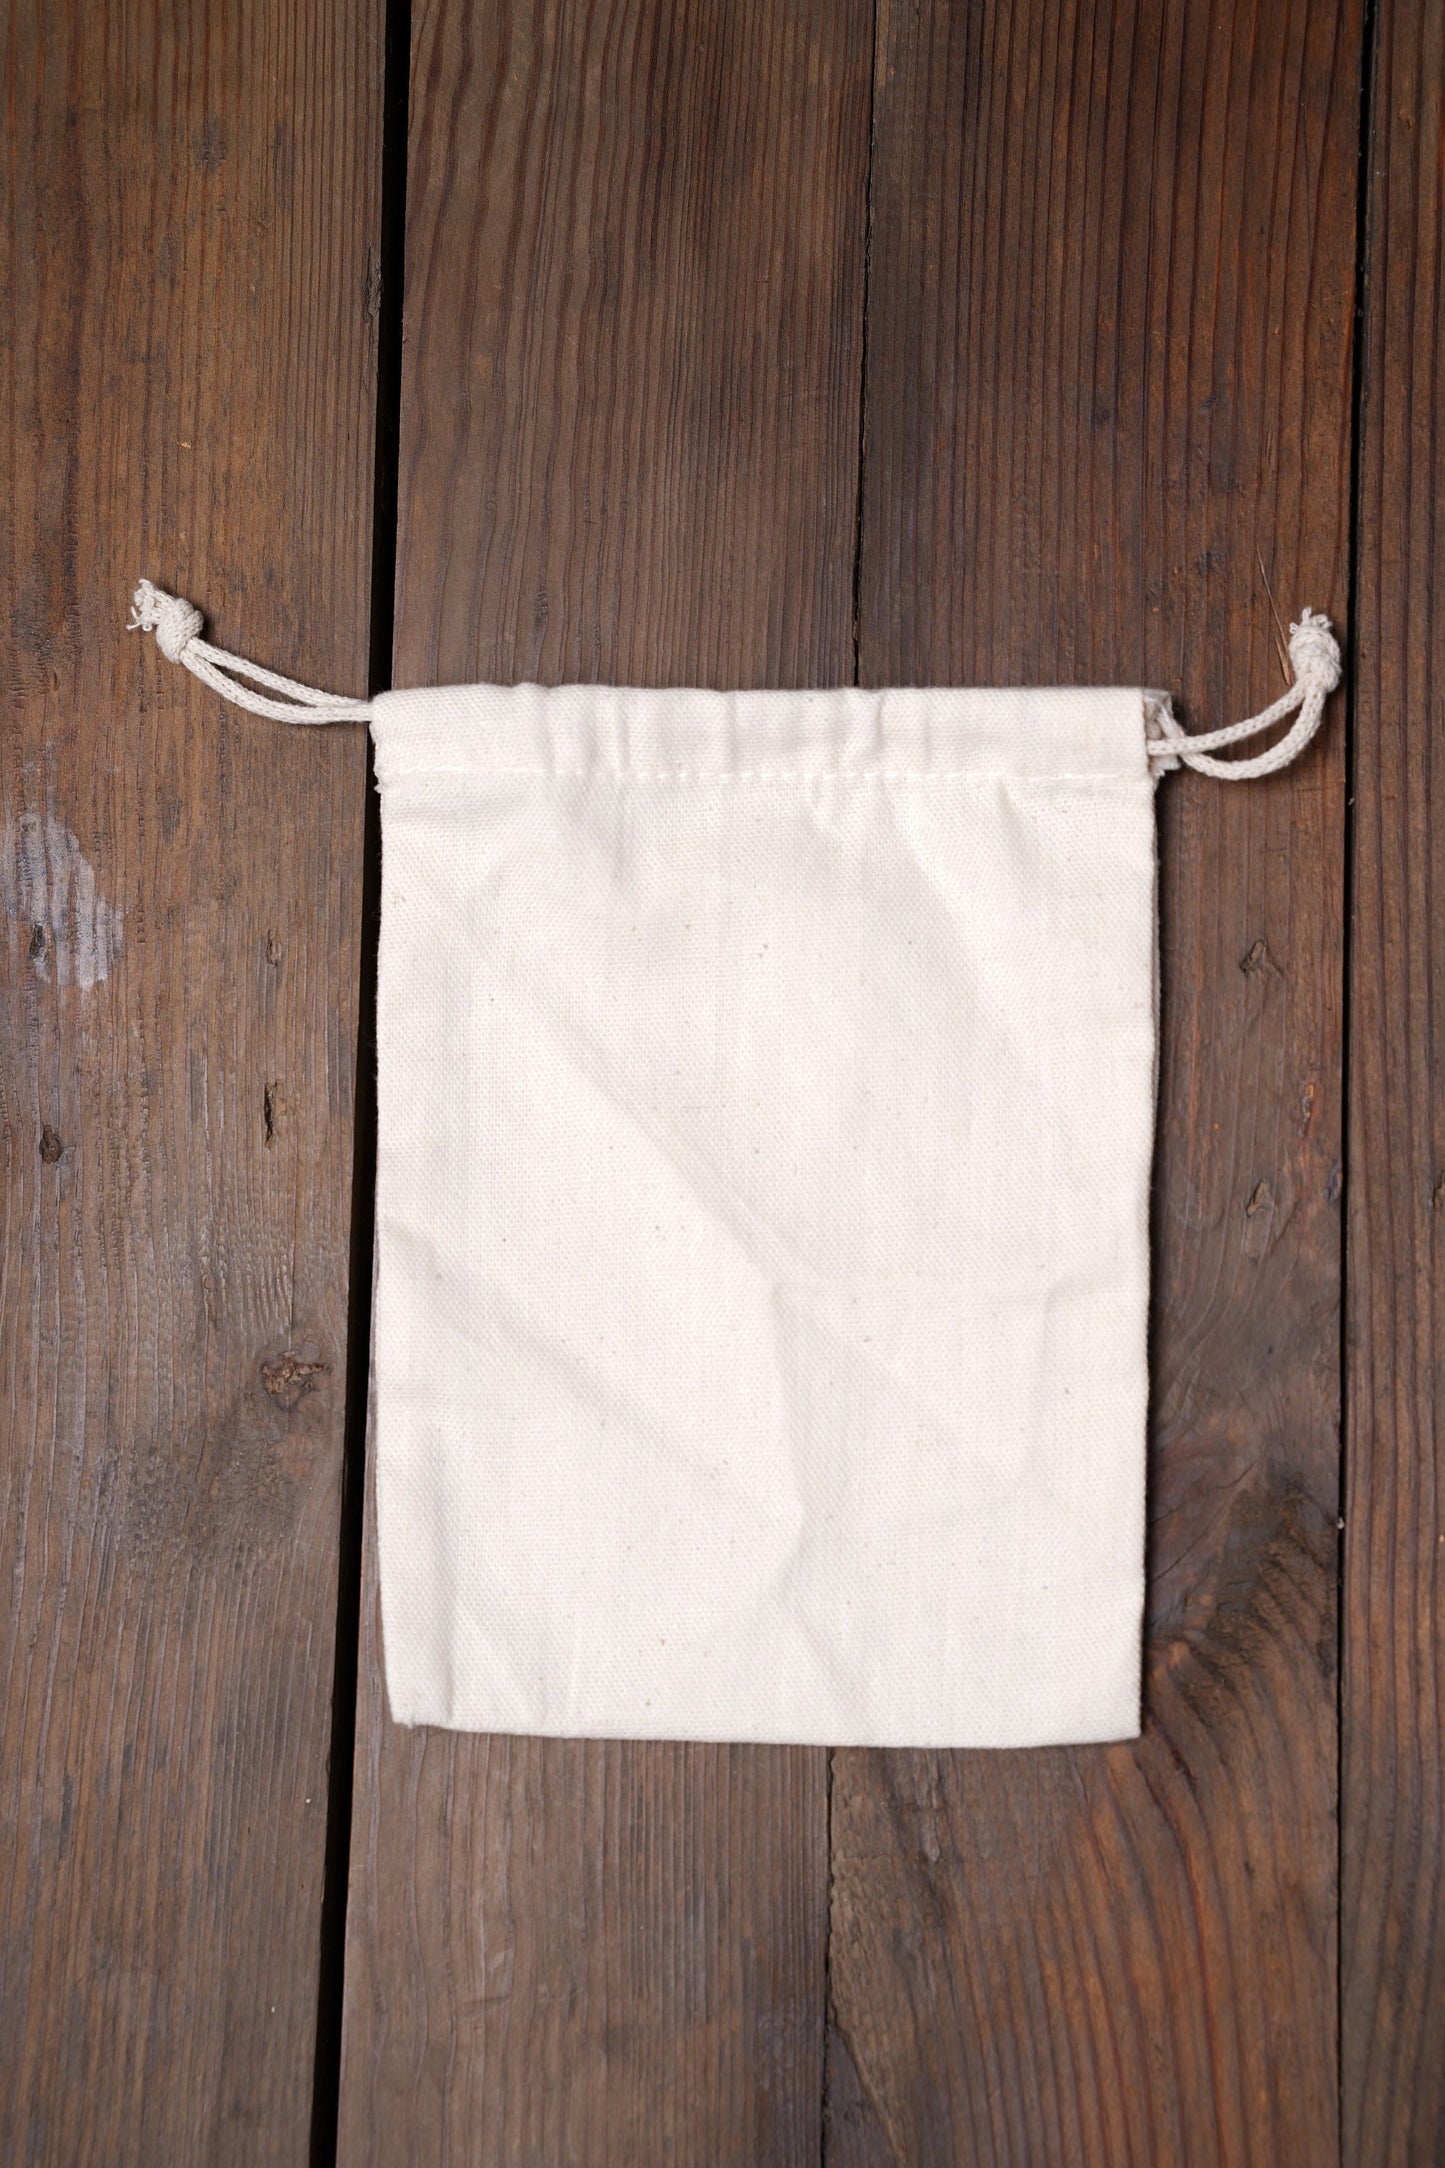 3x5 Inches Reusable Eco-Friendly Double Drawstring Cotton CANVAS Bags Natural Color